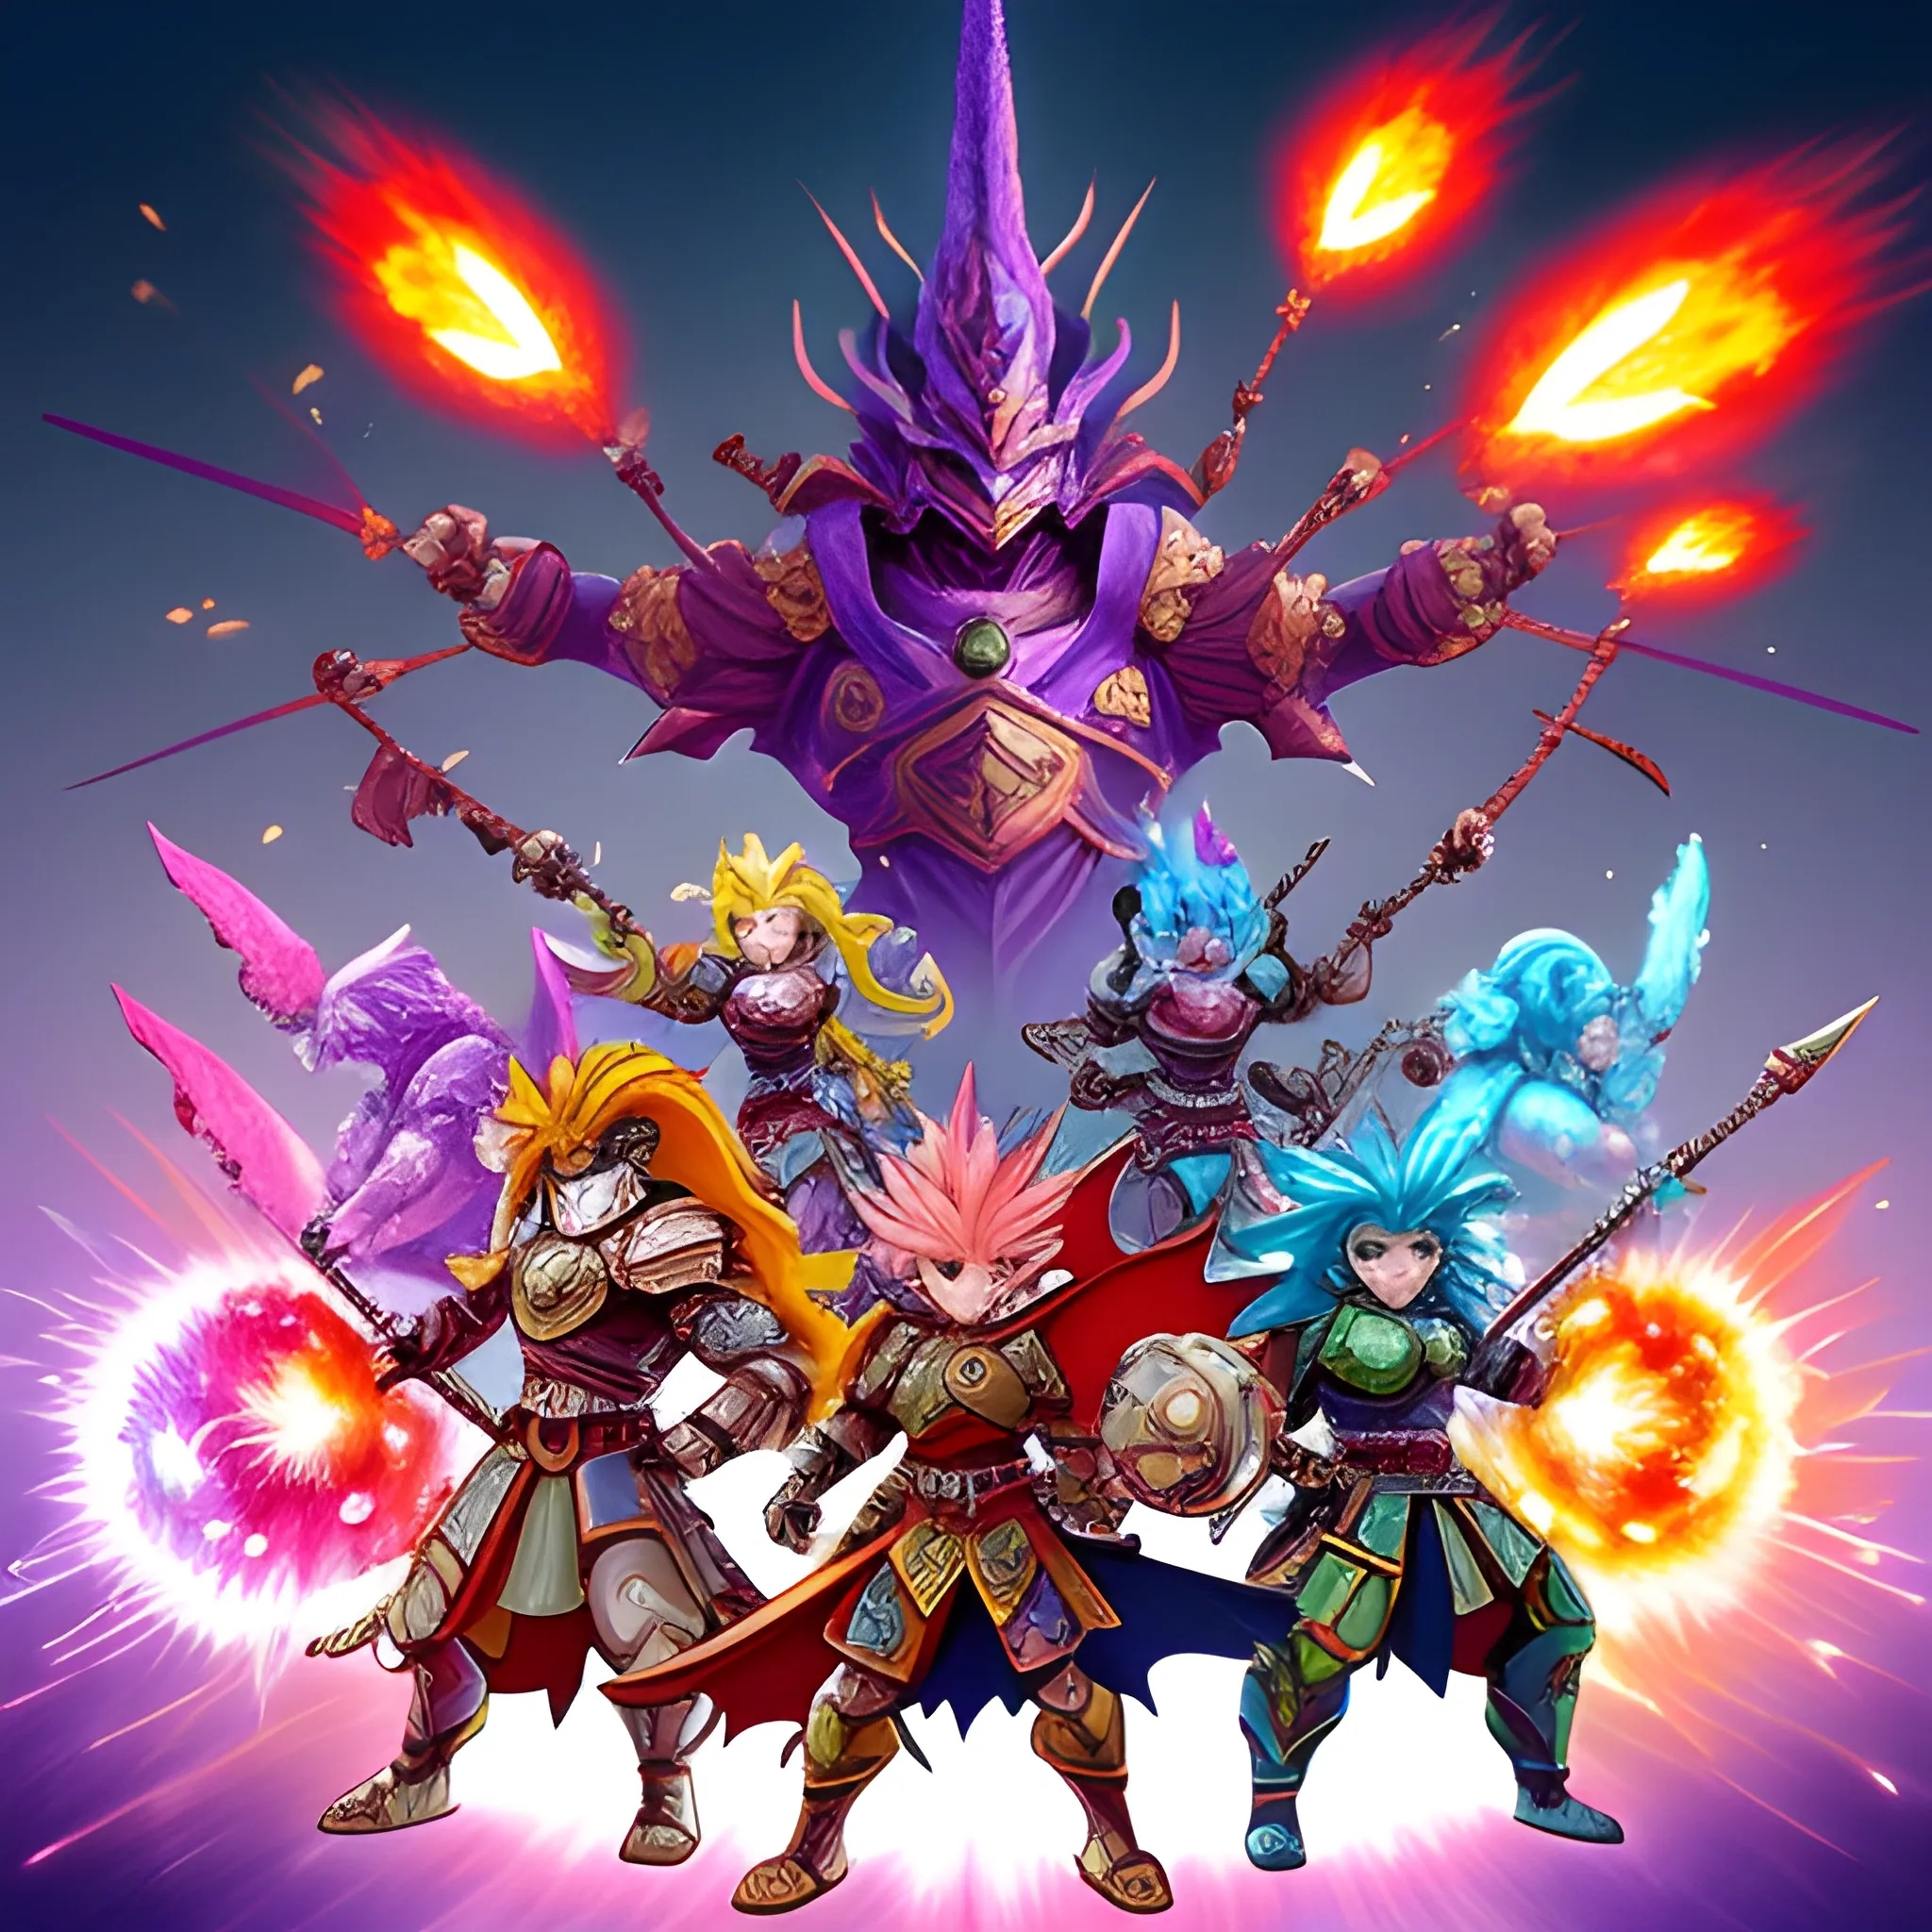 Brave warriors with diverse, colorful weapons and armor, standing heroically and determined in an anime style.Fire, ice, lightning, and other mystical elements.Cartoonish monsters such as dragons, golems, and other mythical creatures with a cute yet menacing look, surrounding the warriors.Colorful, vibrant, and cartoonish, capturing the fantasy theme of a tower defense game.Full of action and excitement, with sparks flying and magical effects lighting up the scene., Cartoon